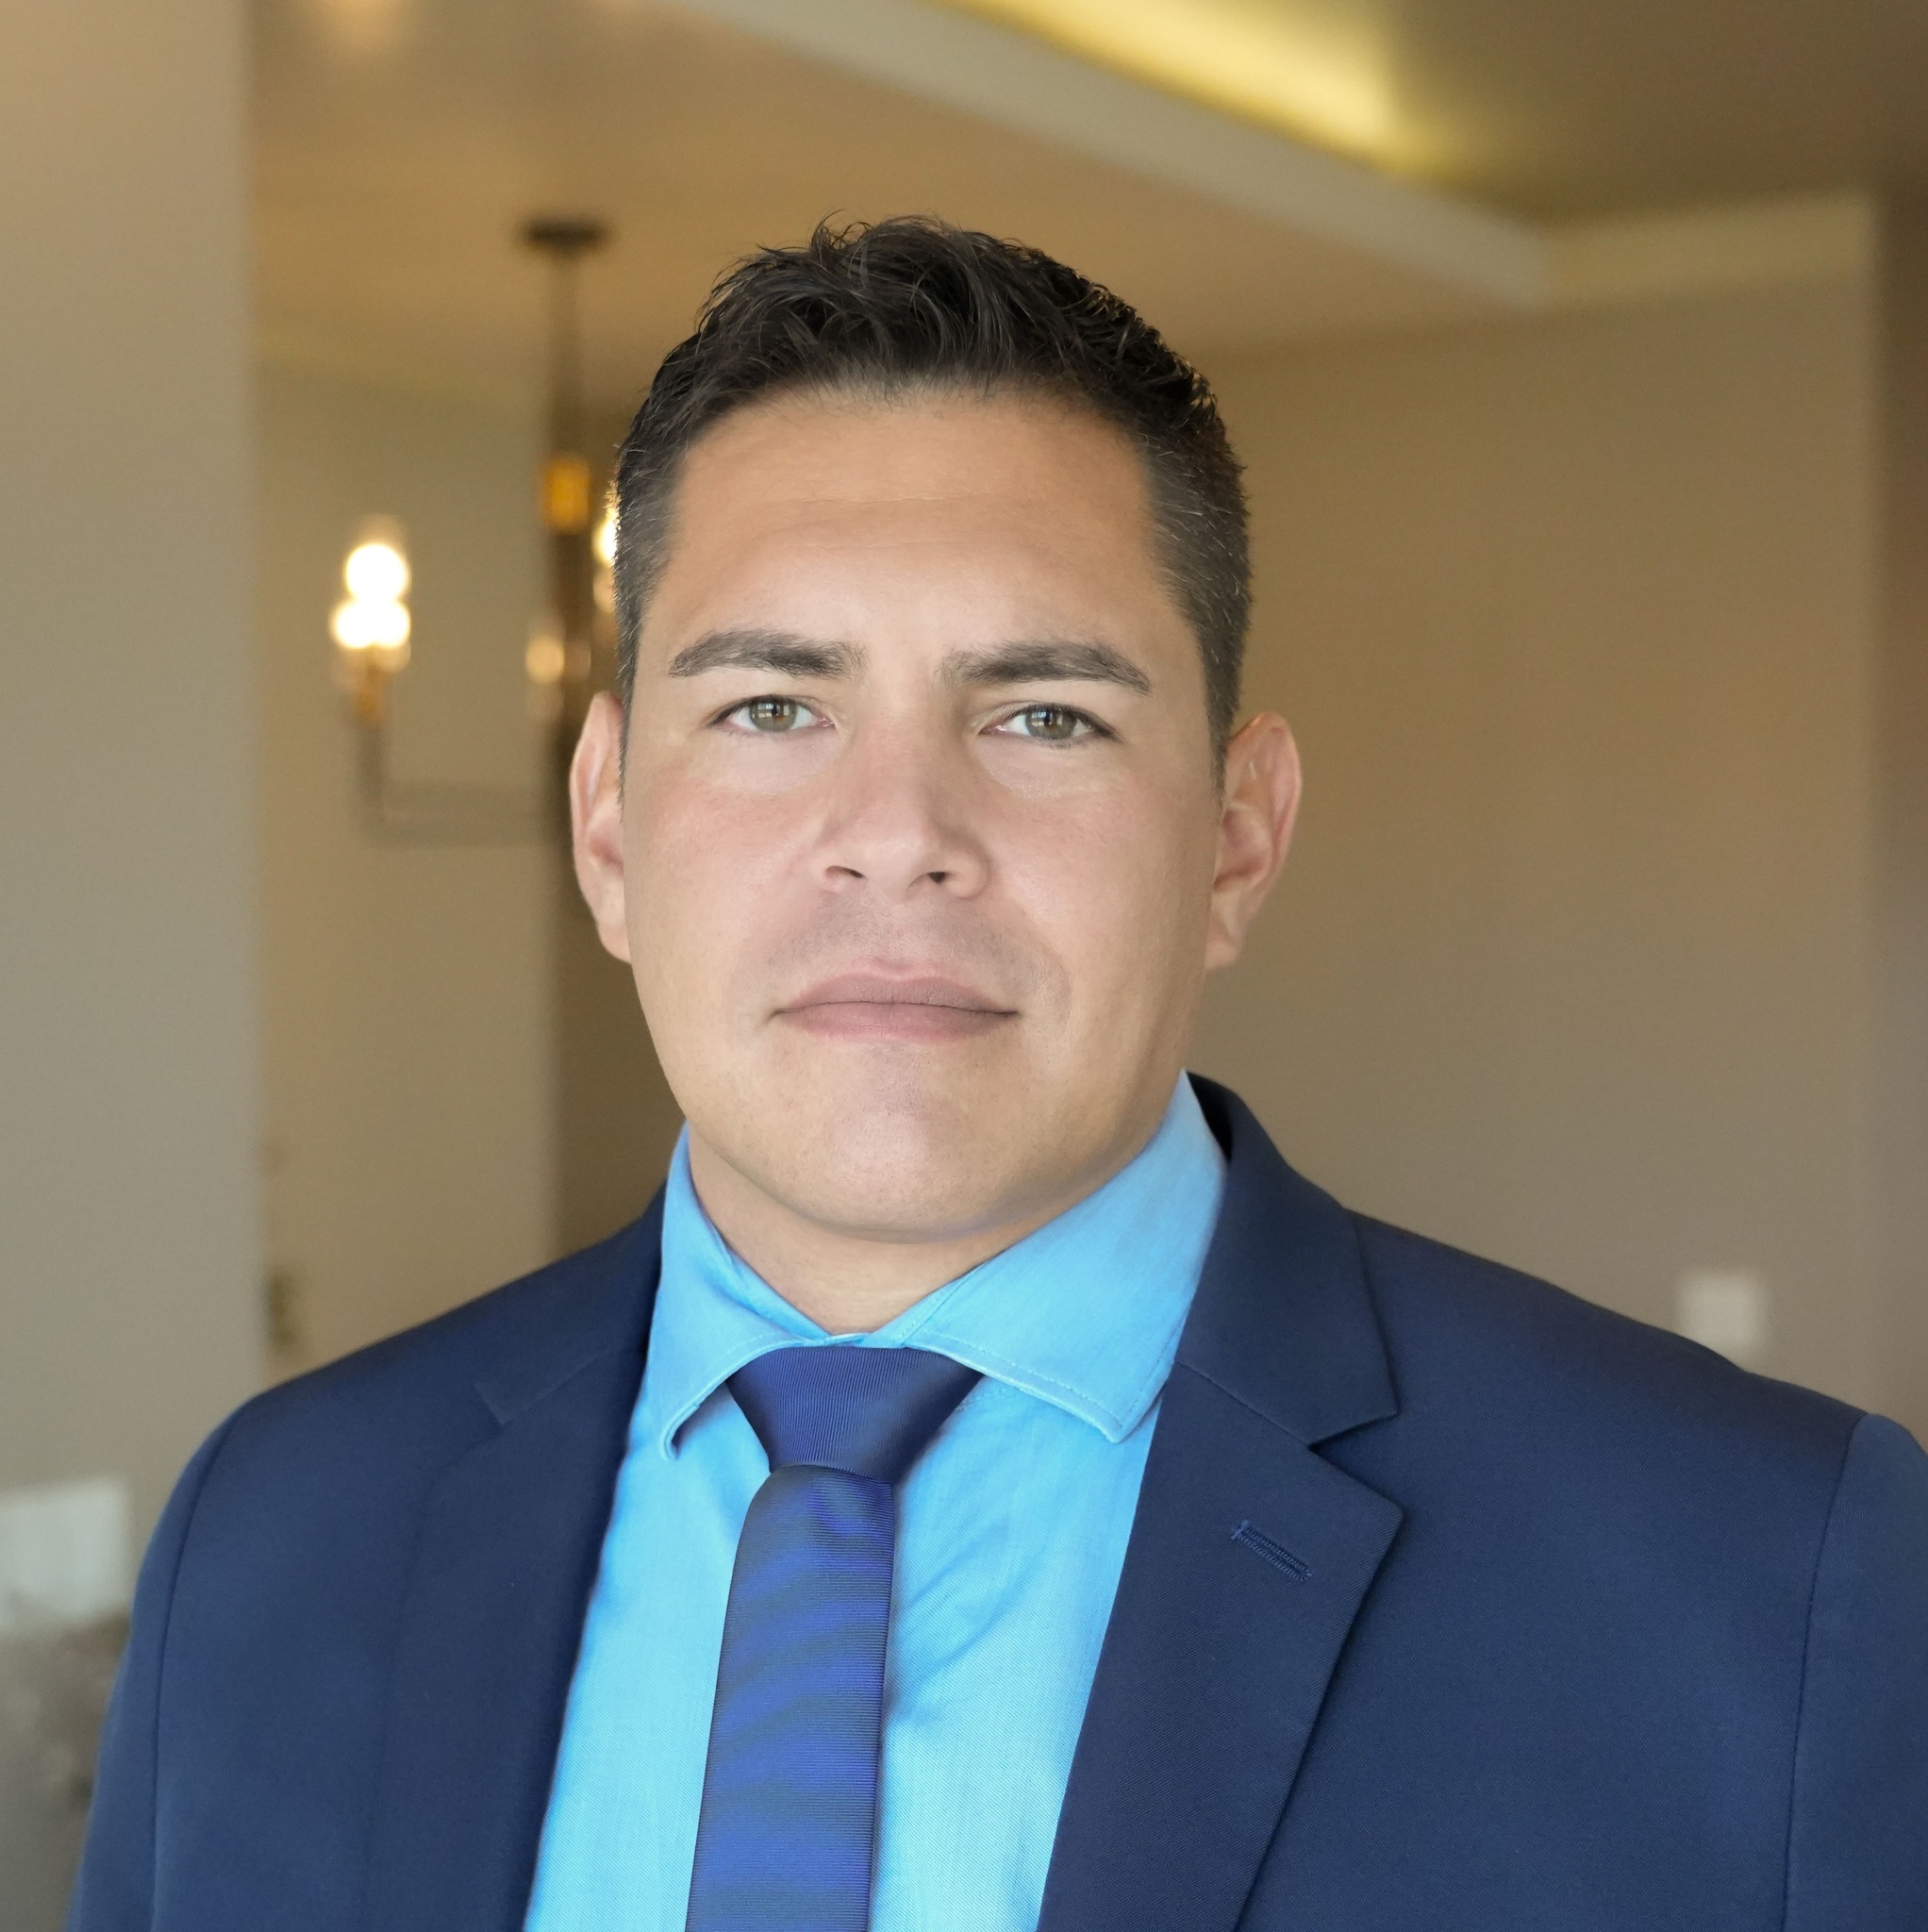 Manny Patino - Top realtors in New Mexico with excellent negotiation skills